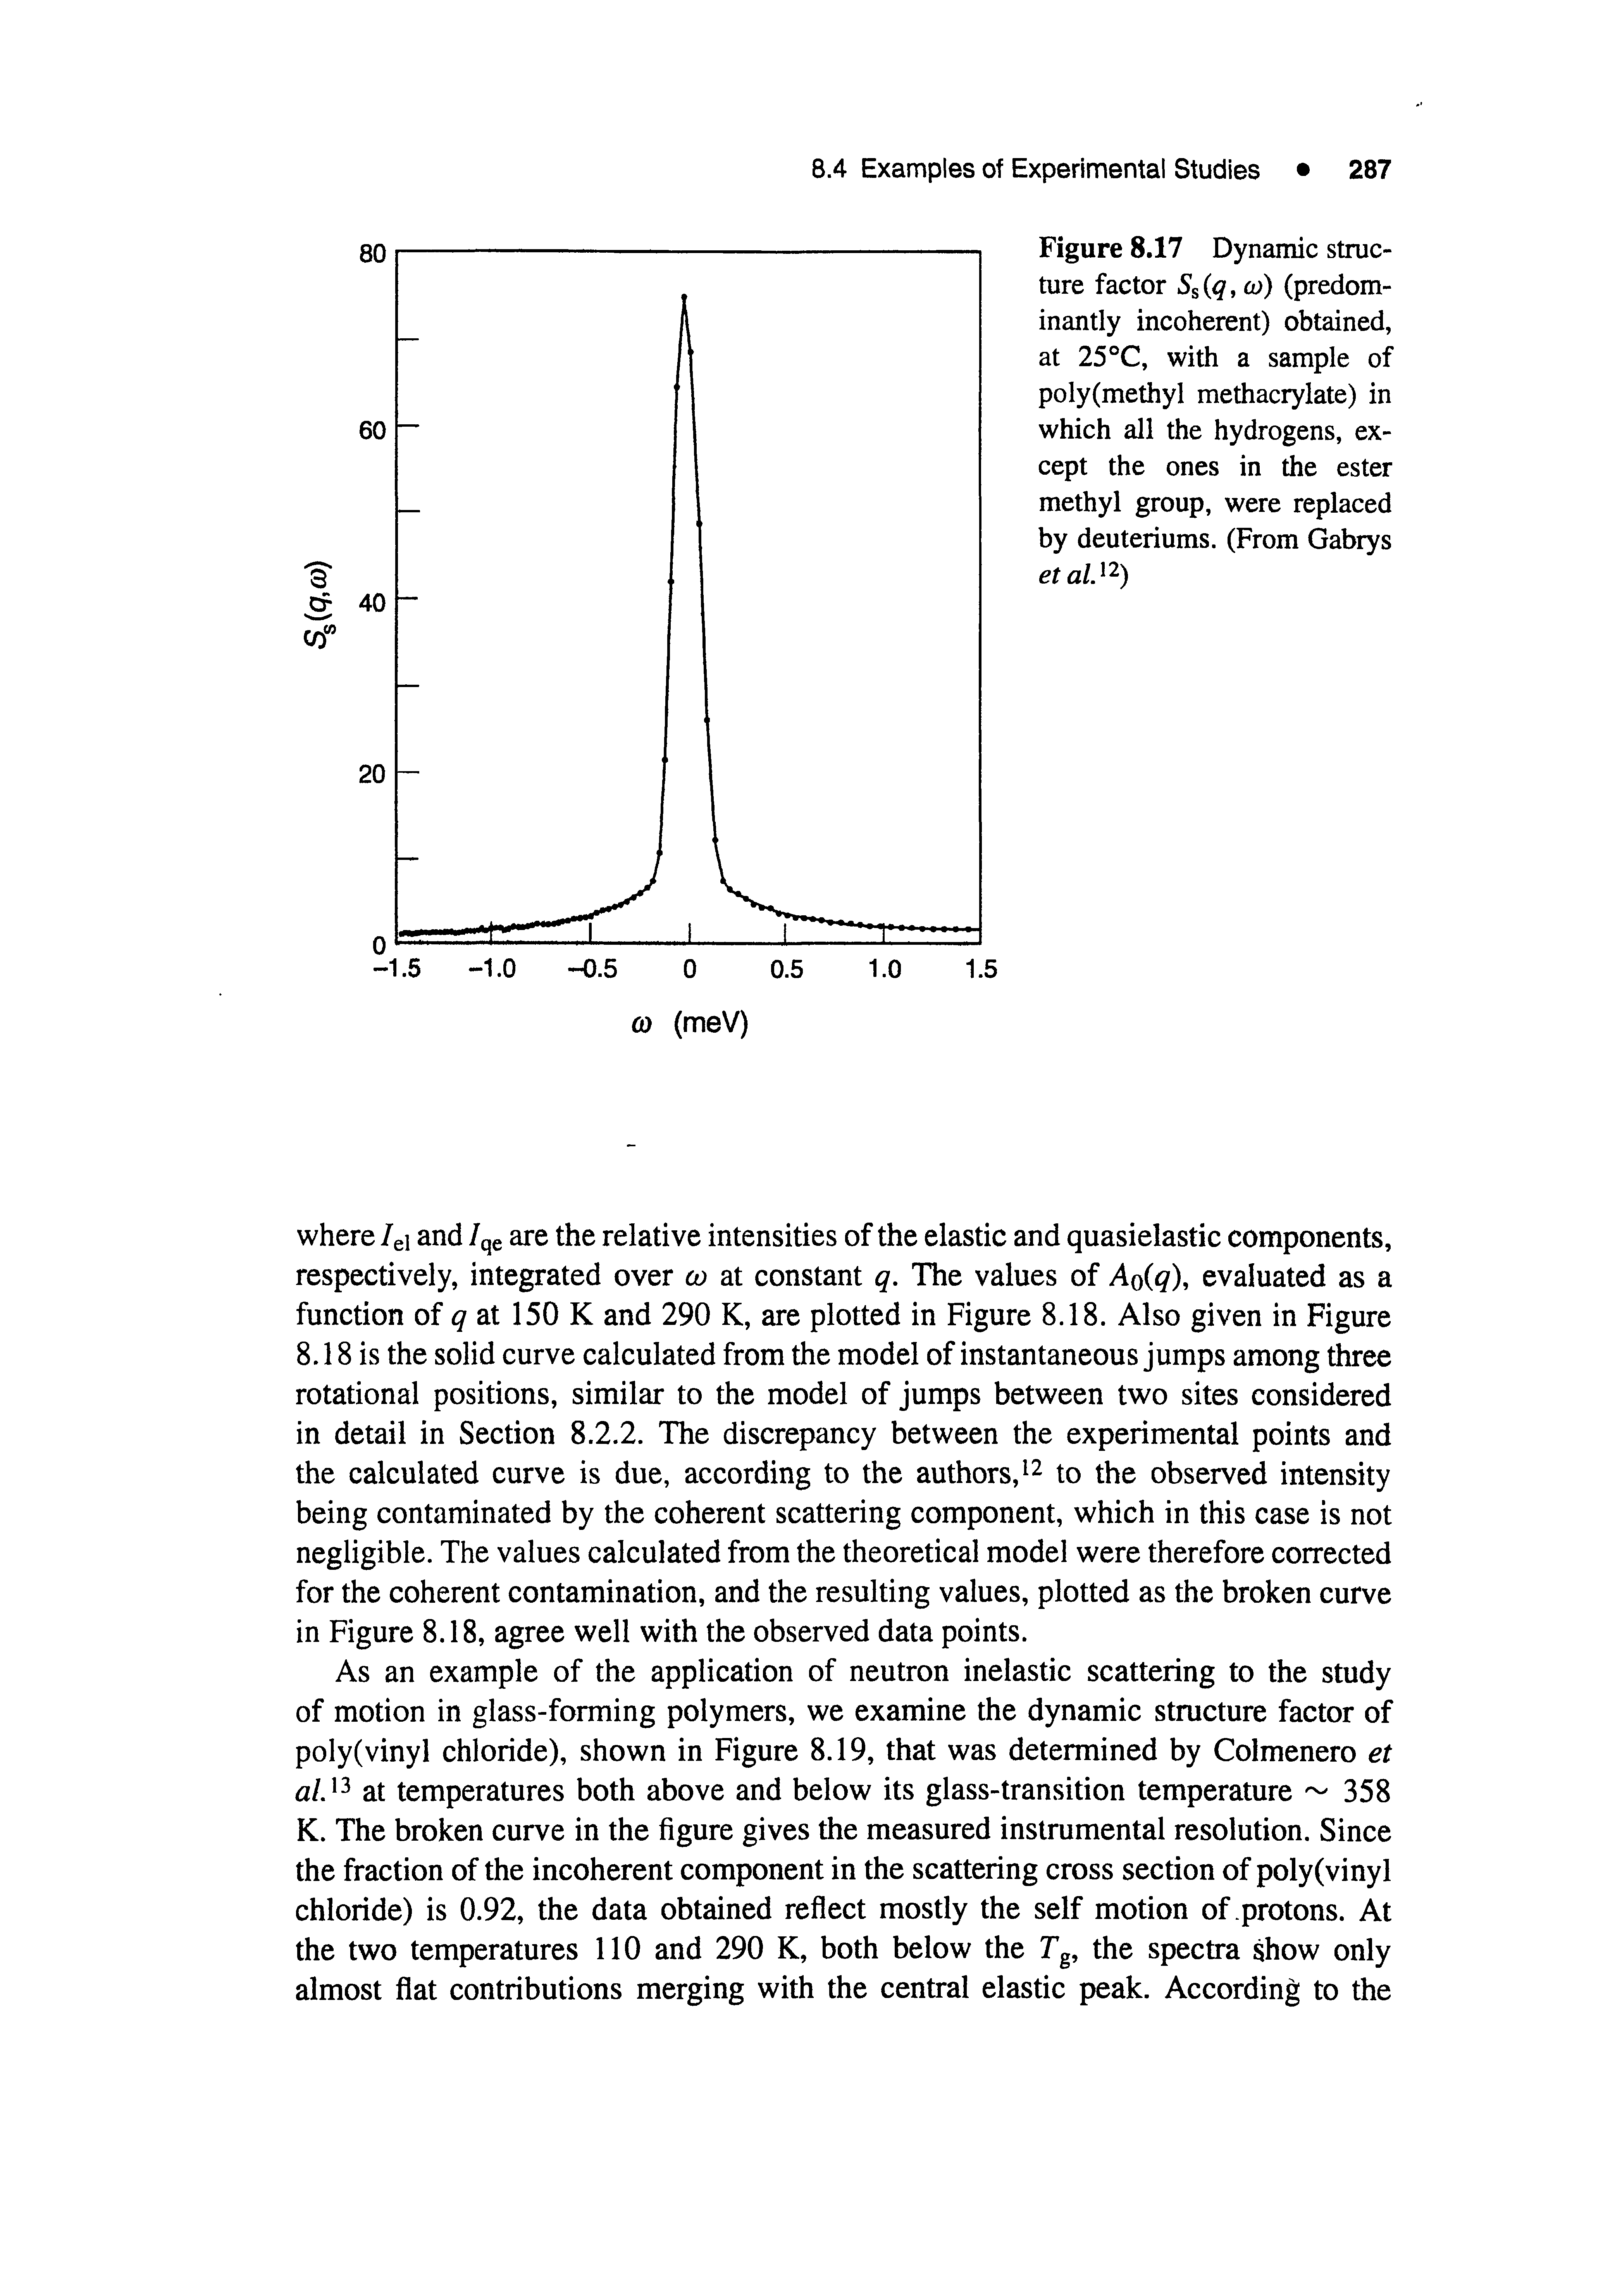 Figure 8.17 Dynamic structure factor Ss (q, co) (predominantly incoherent) obtained, at 25 °C, with a sample of poly(methyl methacrylate) in which all the hydrogens, except the ones in the ester methyl group, were replaced by deuteriums. (From Gabrys et al.11)...